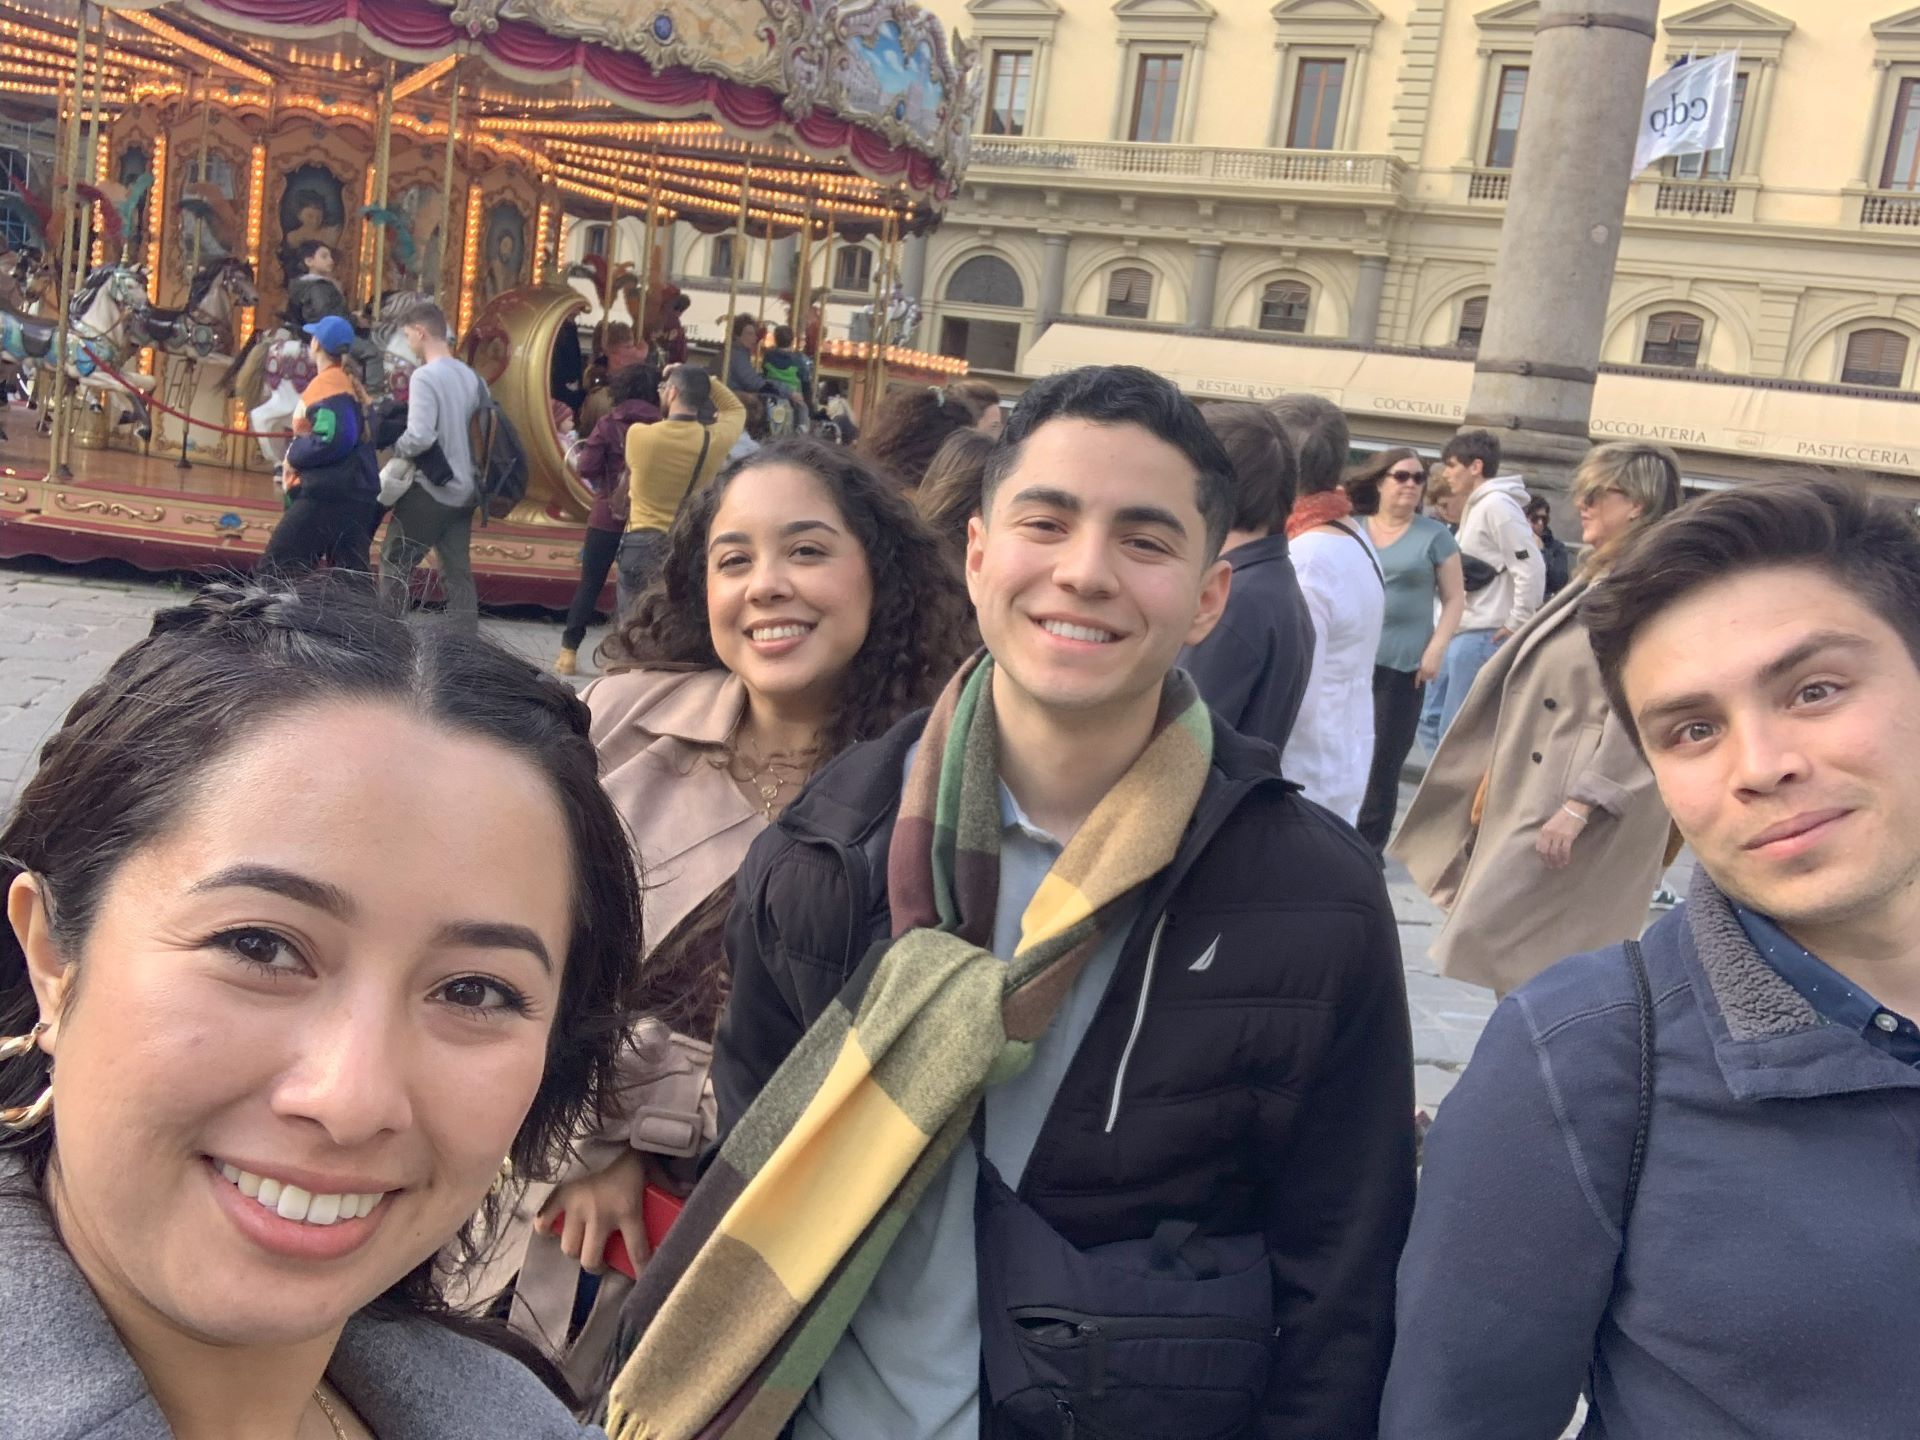 CSUSB Palm Desert Campus hospitality management students enjoy the sights in Italy.